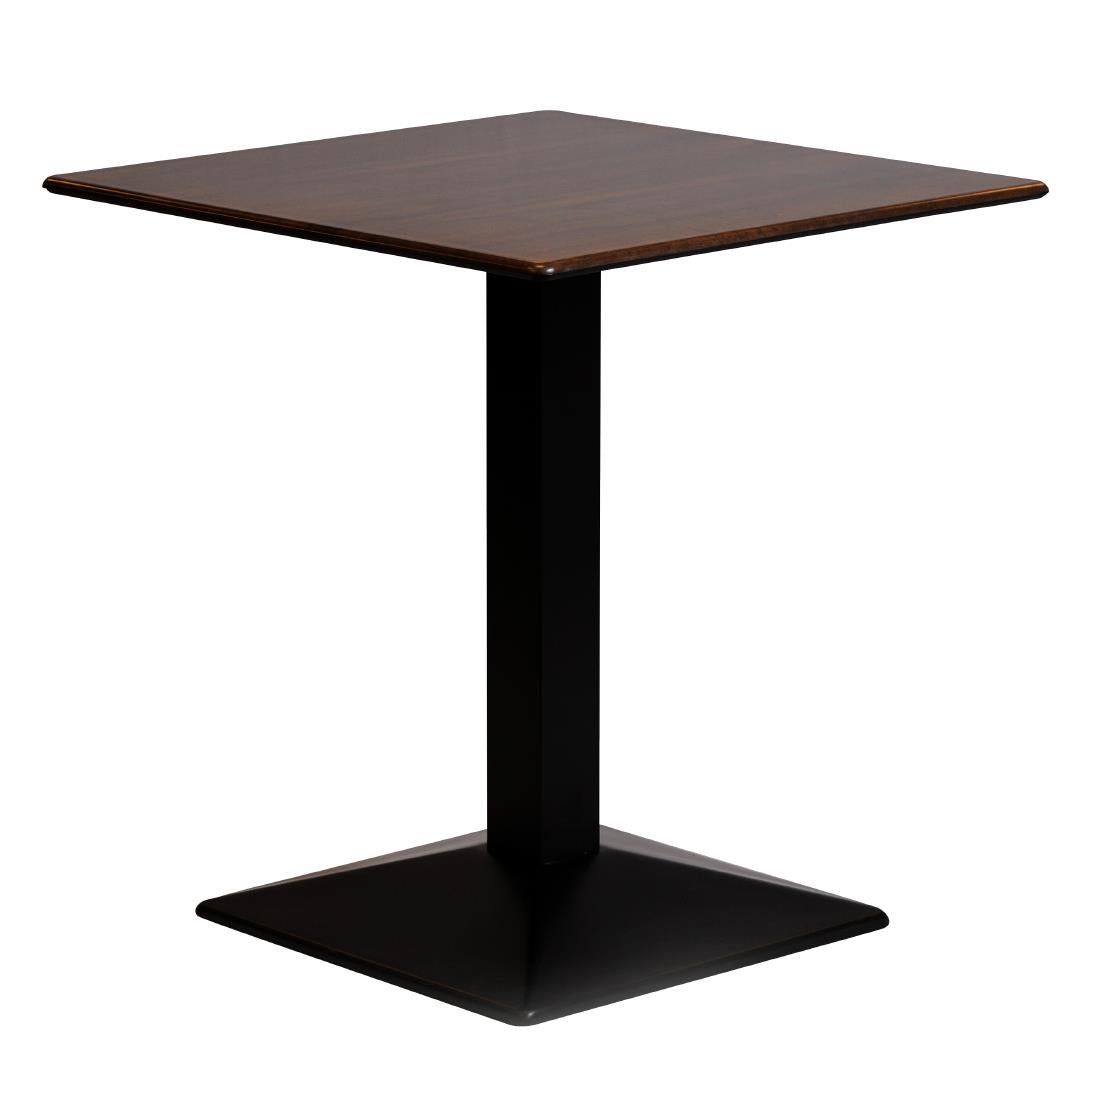 CZ813 Turin Metal Base Square Dining Table with Laminate Top Walnut 600mm JD Catering Equipment Solutions Ltd